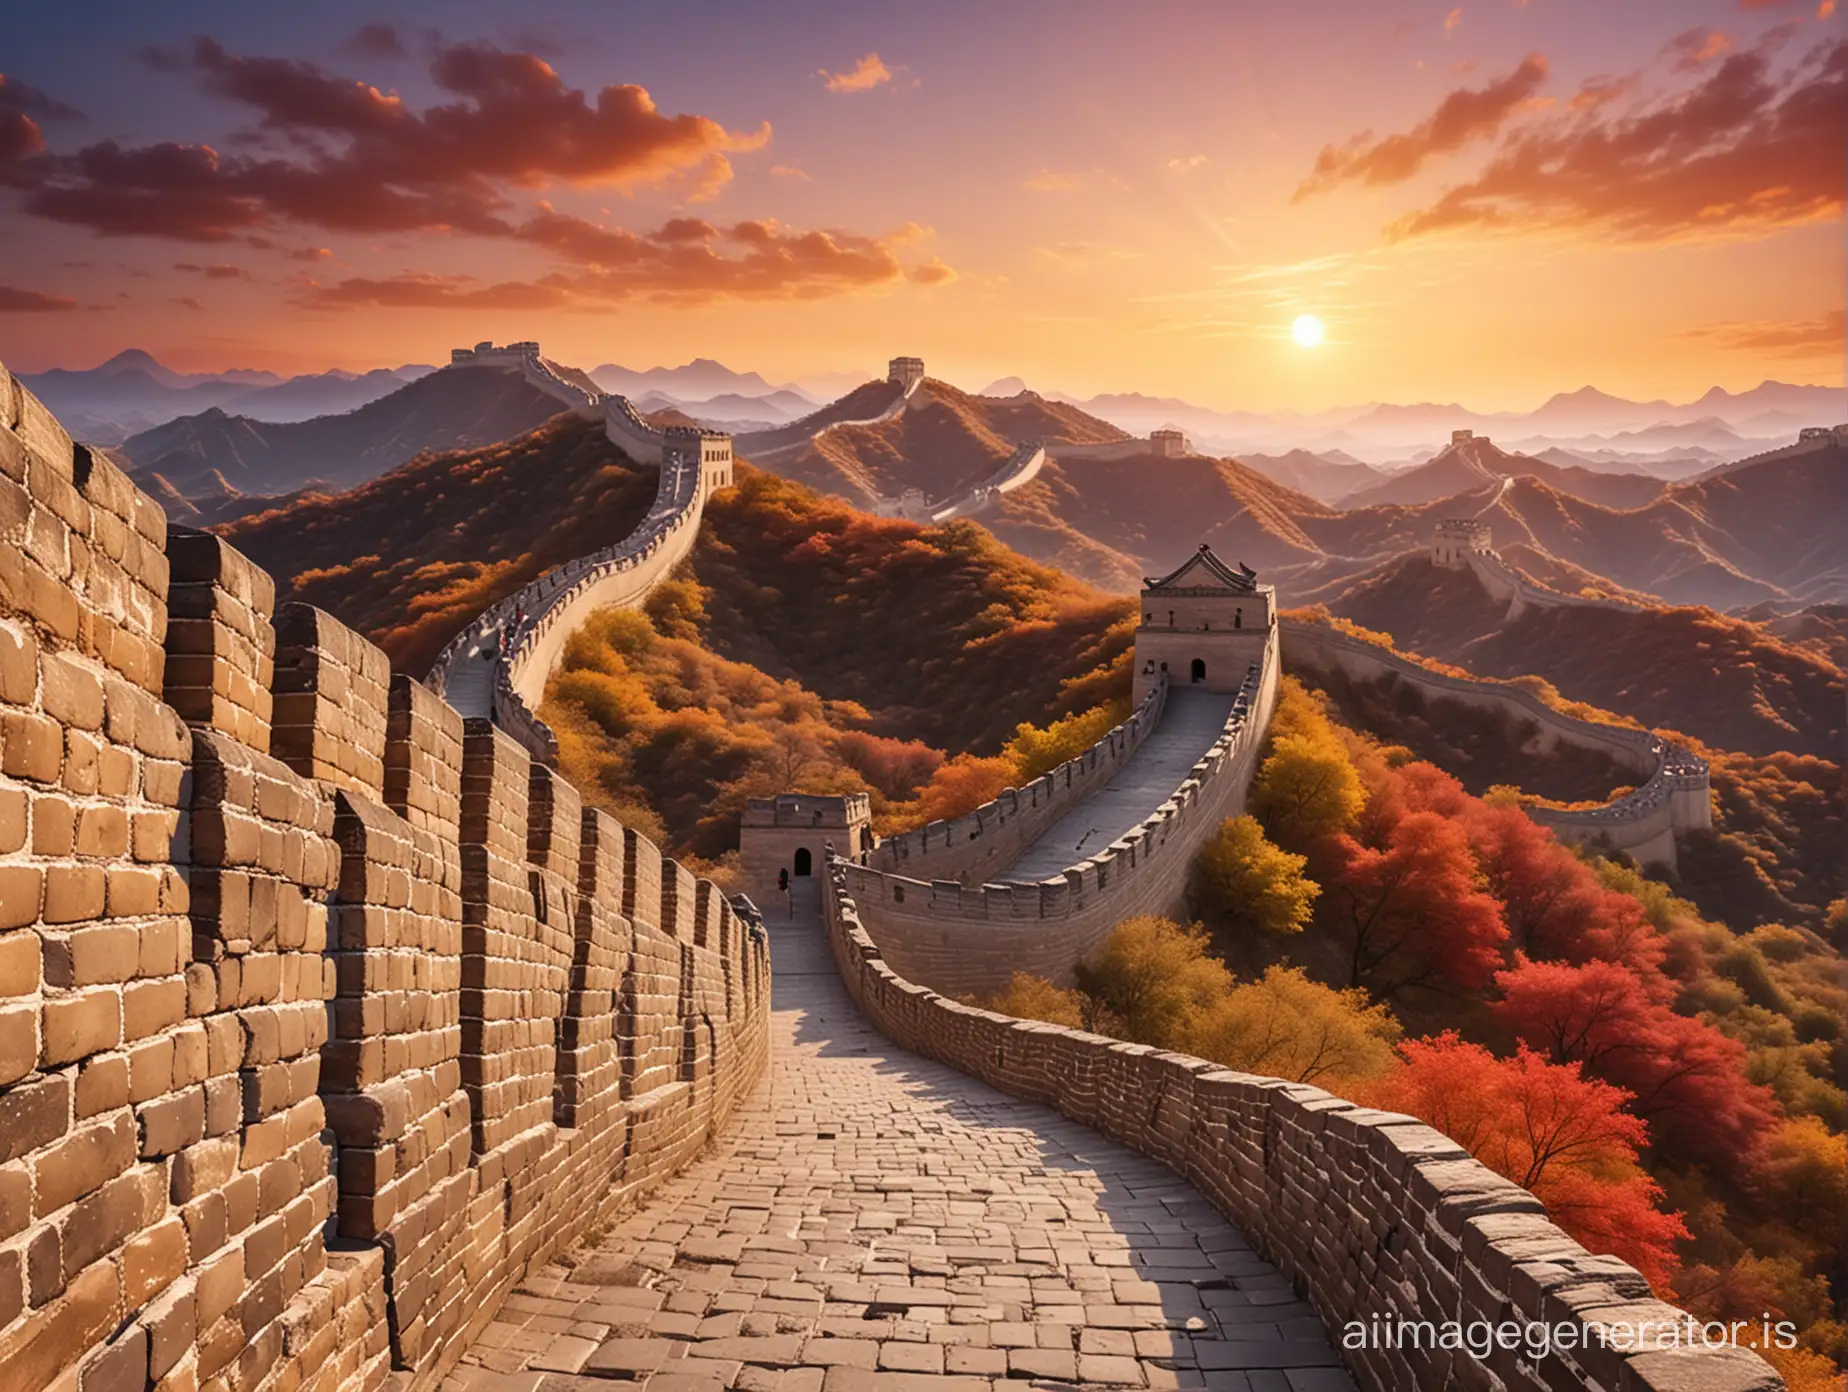 Morning-Glory-The-Great-Wall-of-China-Bathed-in-Golden-Sunrise-Light-and-Colorful-Clouds